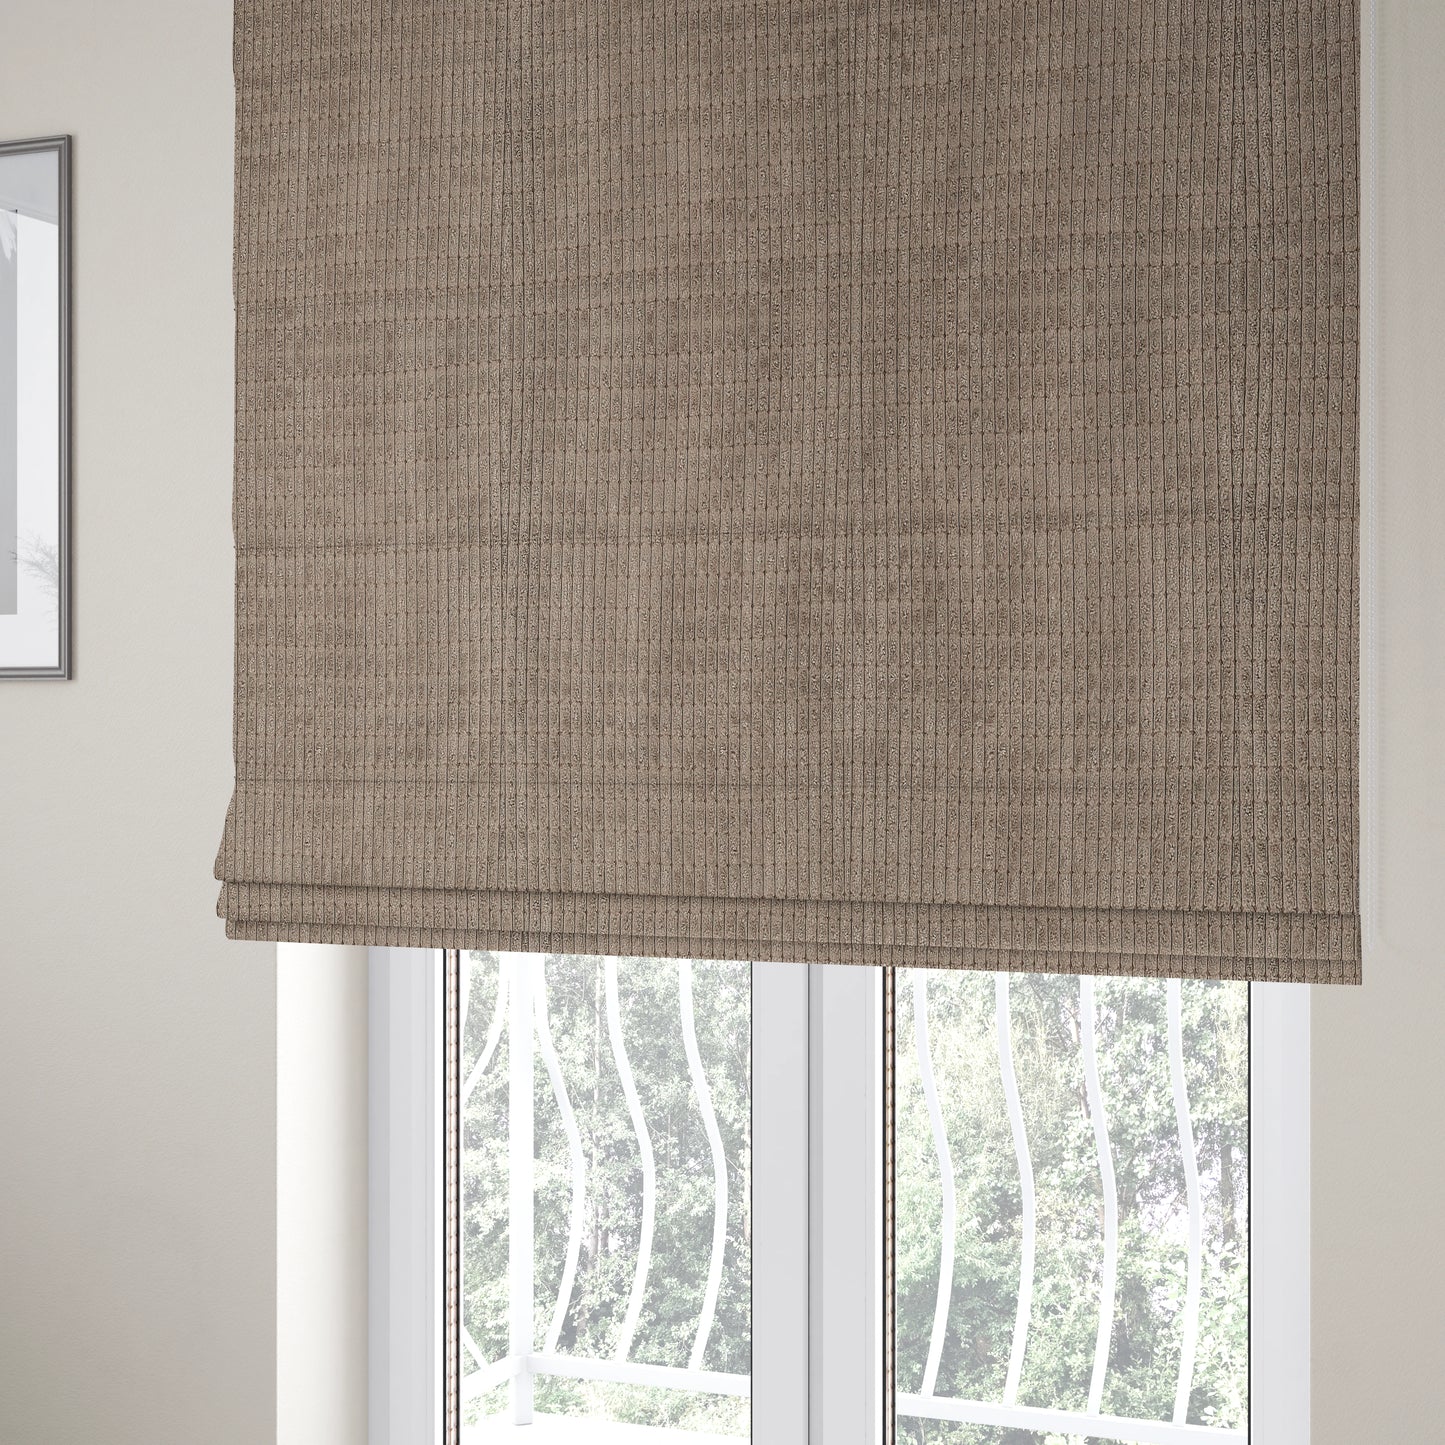 Didcot Brick Effect Corduroy Fabric In Slate Grey Colour - Roman Blinds